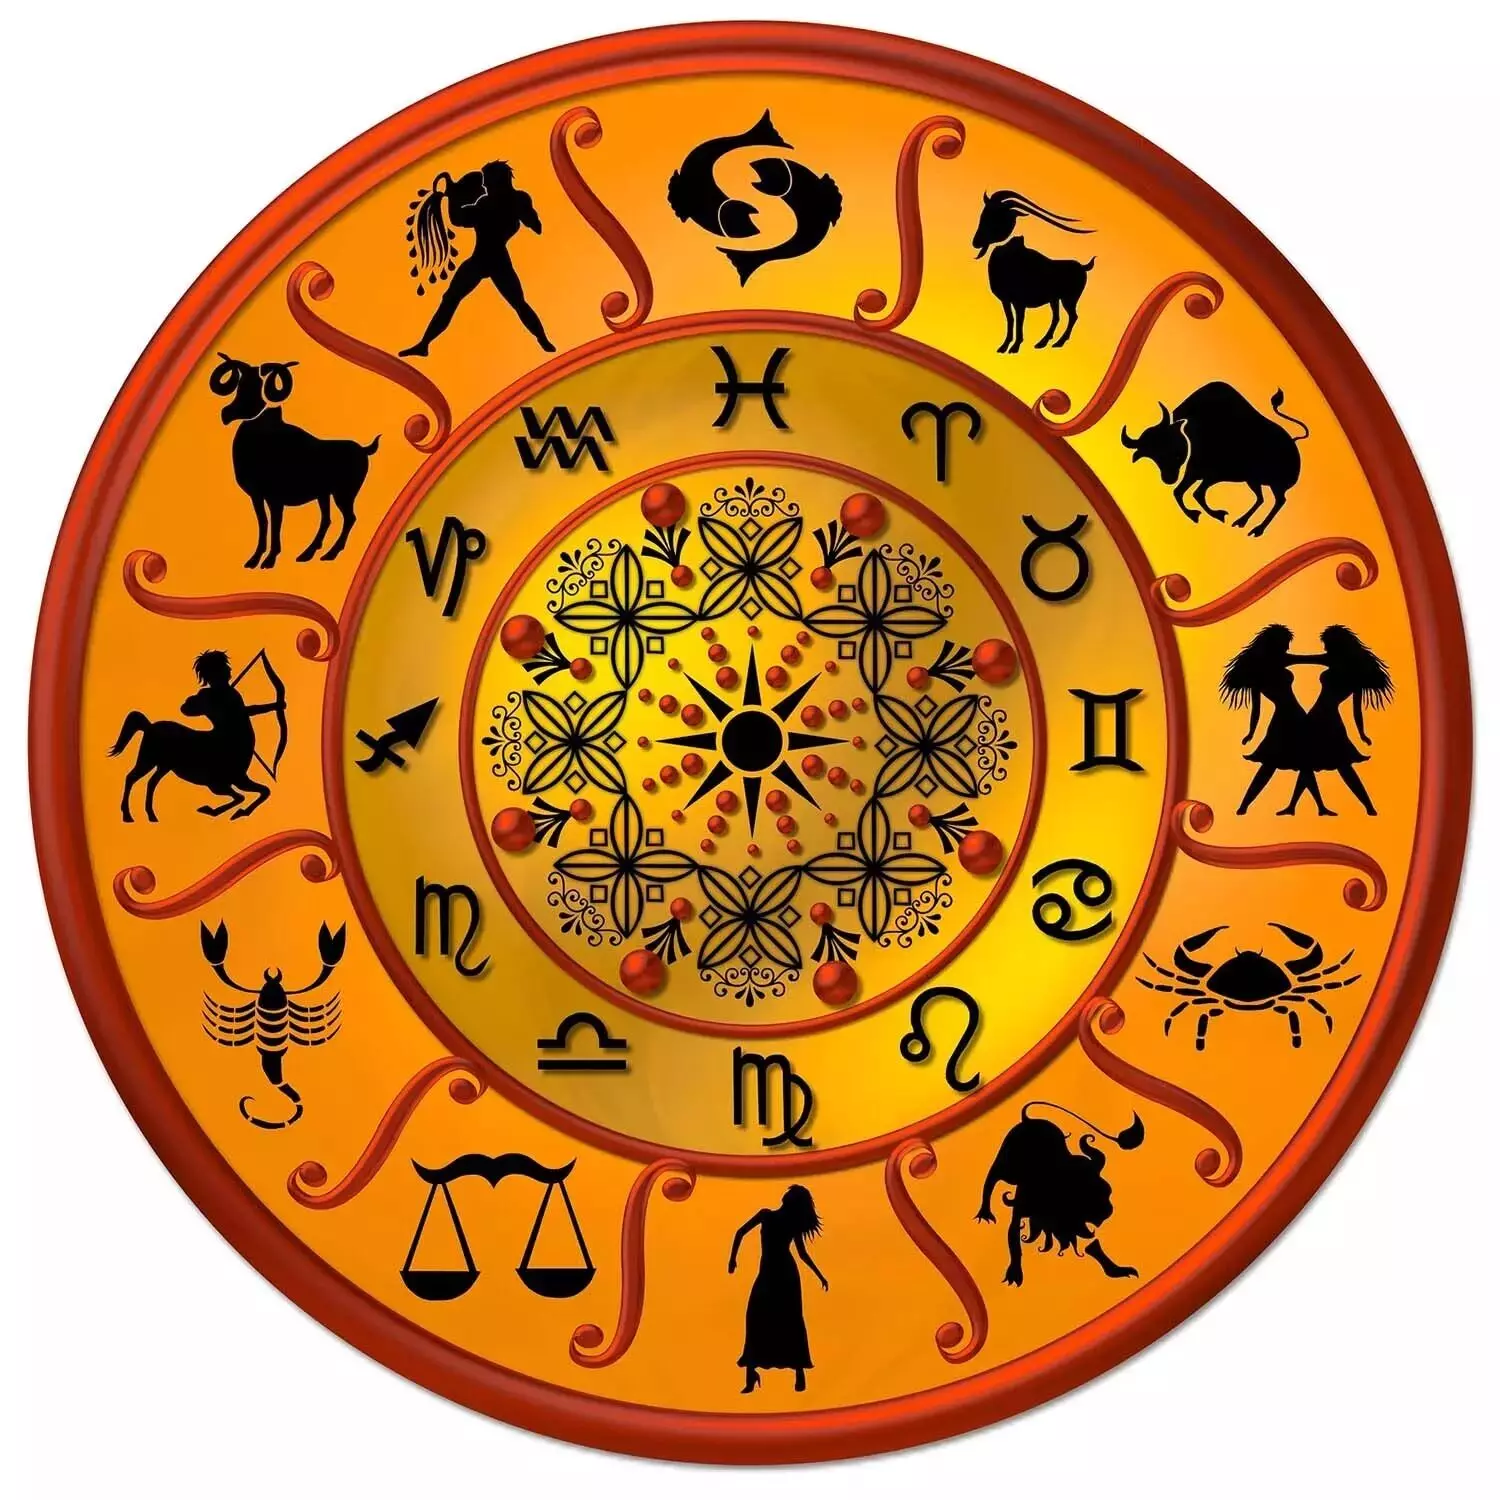 02 February   – Know your todays horoscope